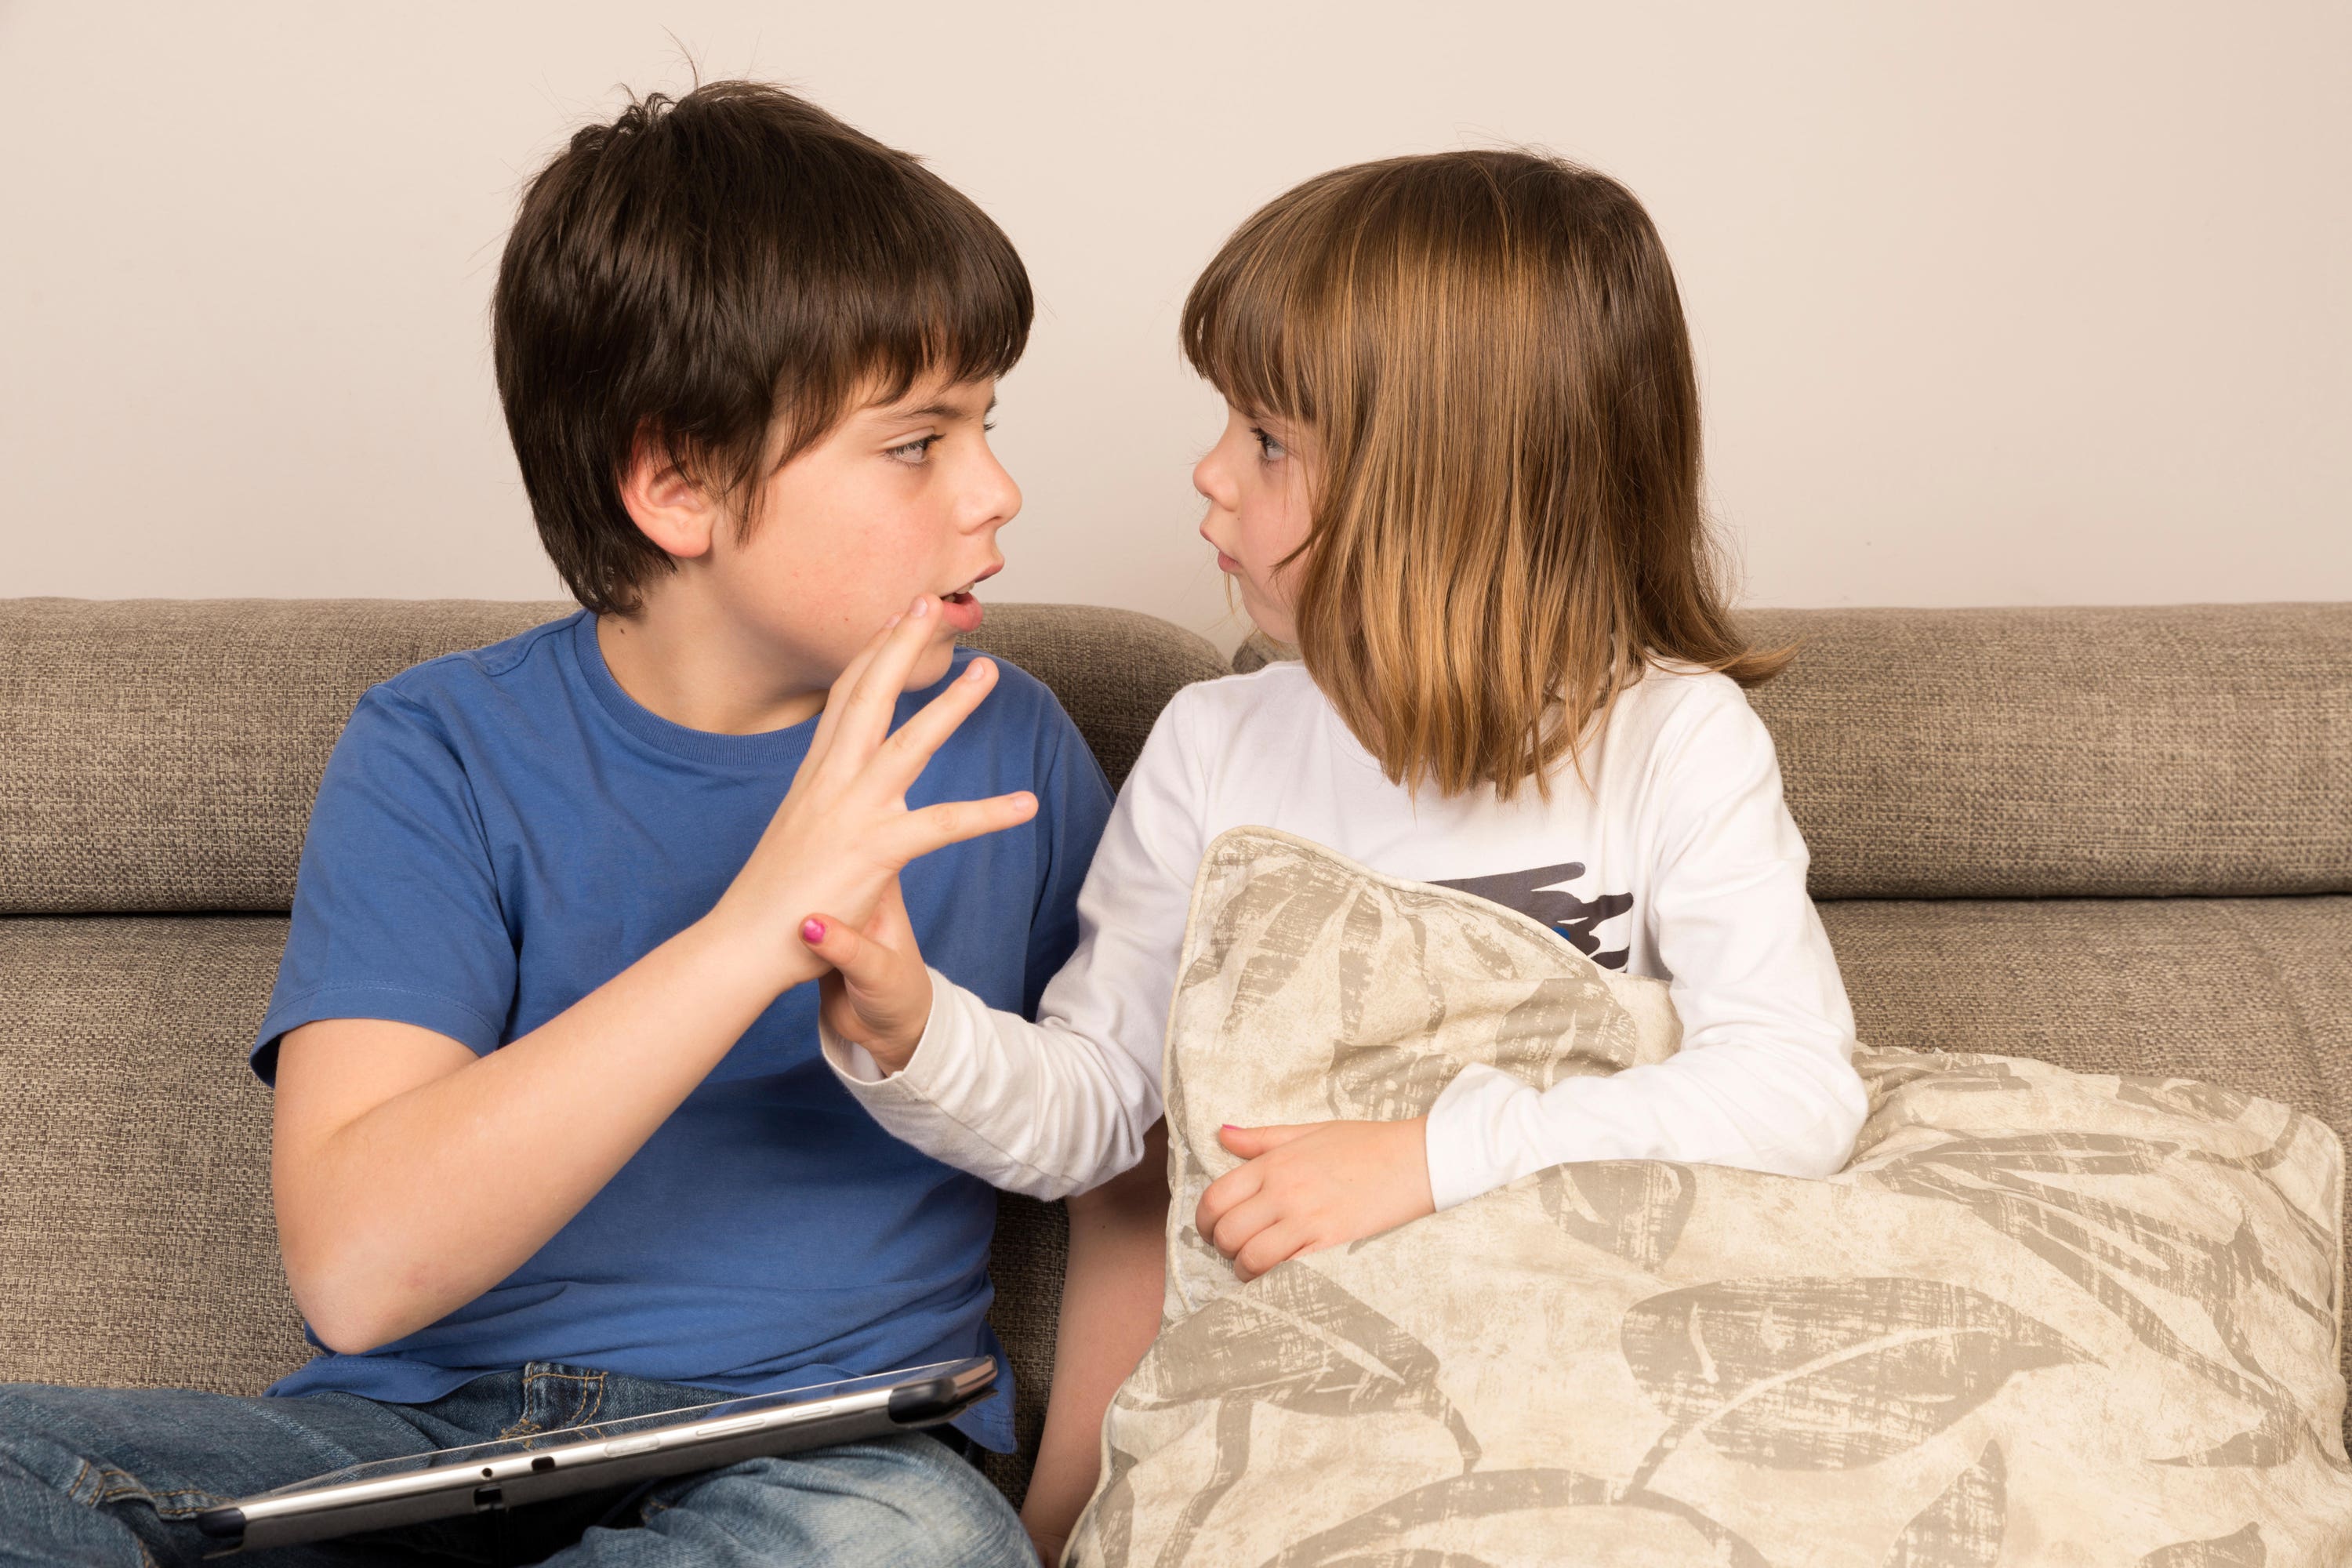 How To Deal With Childrens Sibling Rivalry The Independent